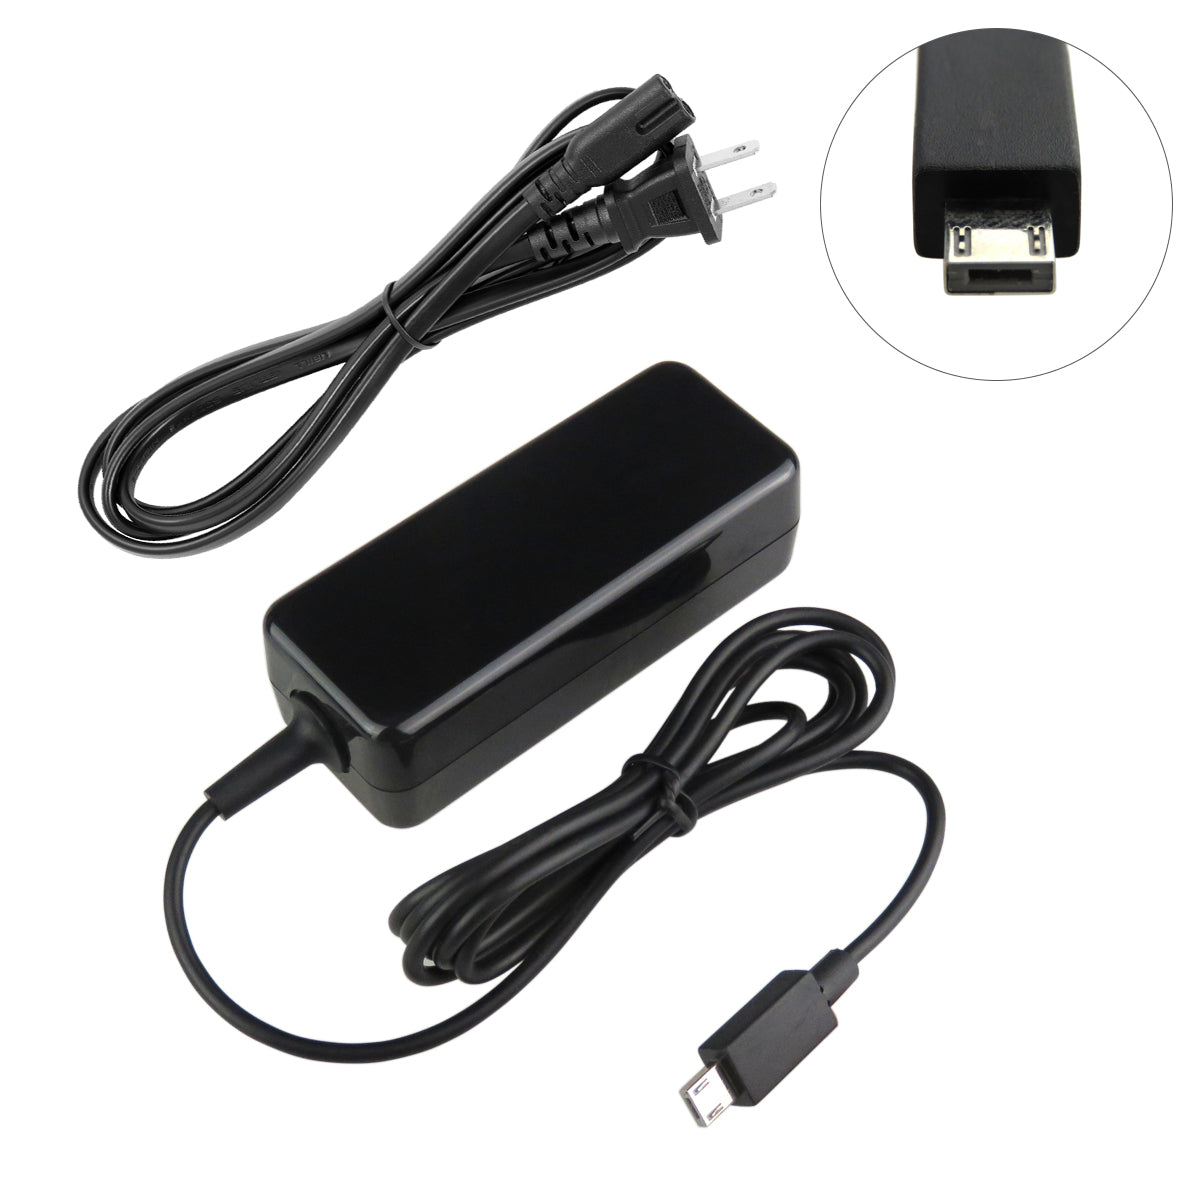 Charger for ASUS EeeBook E202SA-FD0012T Laptop.